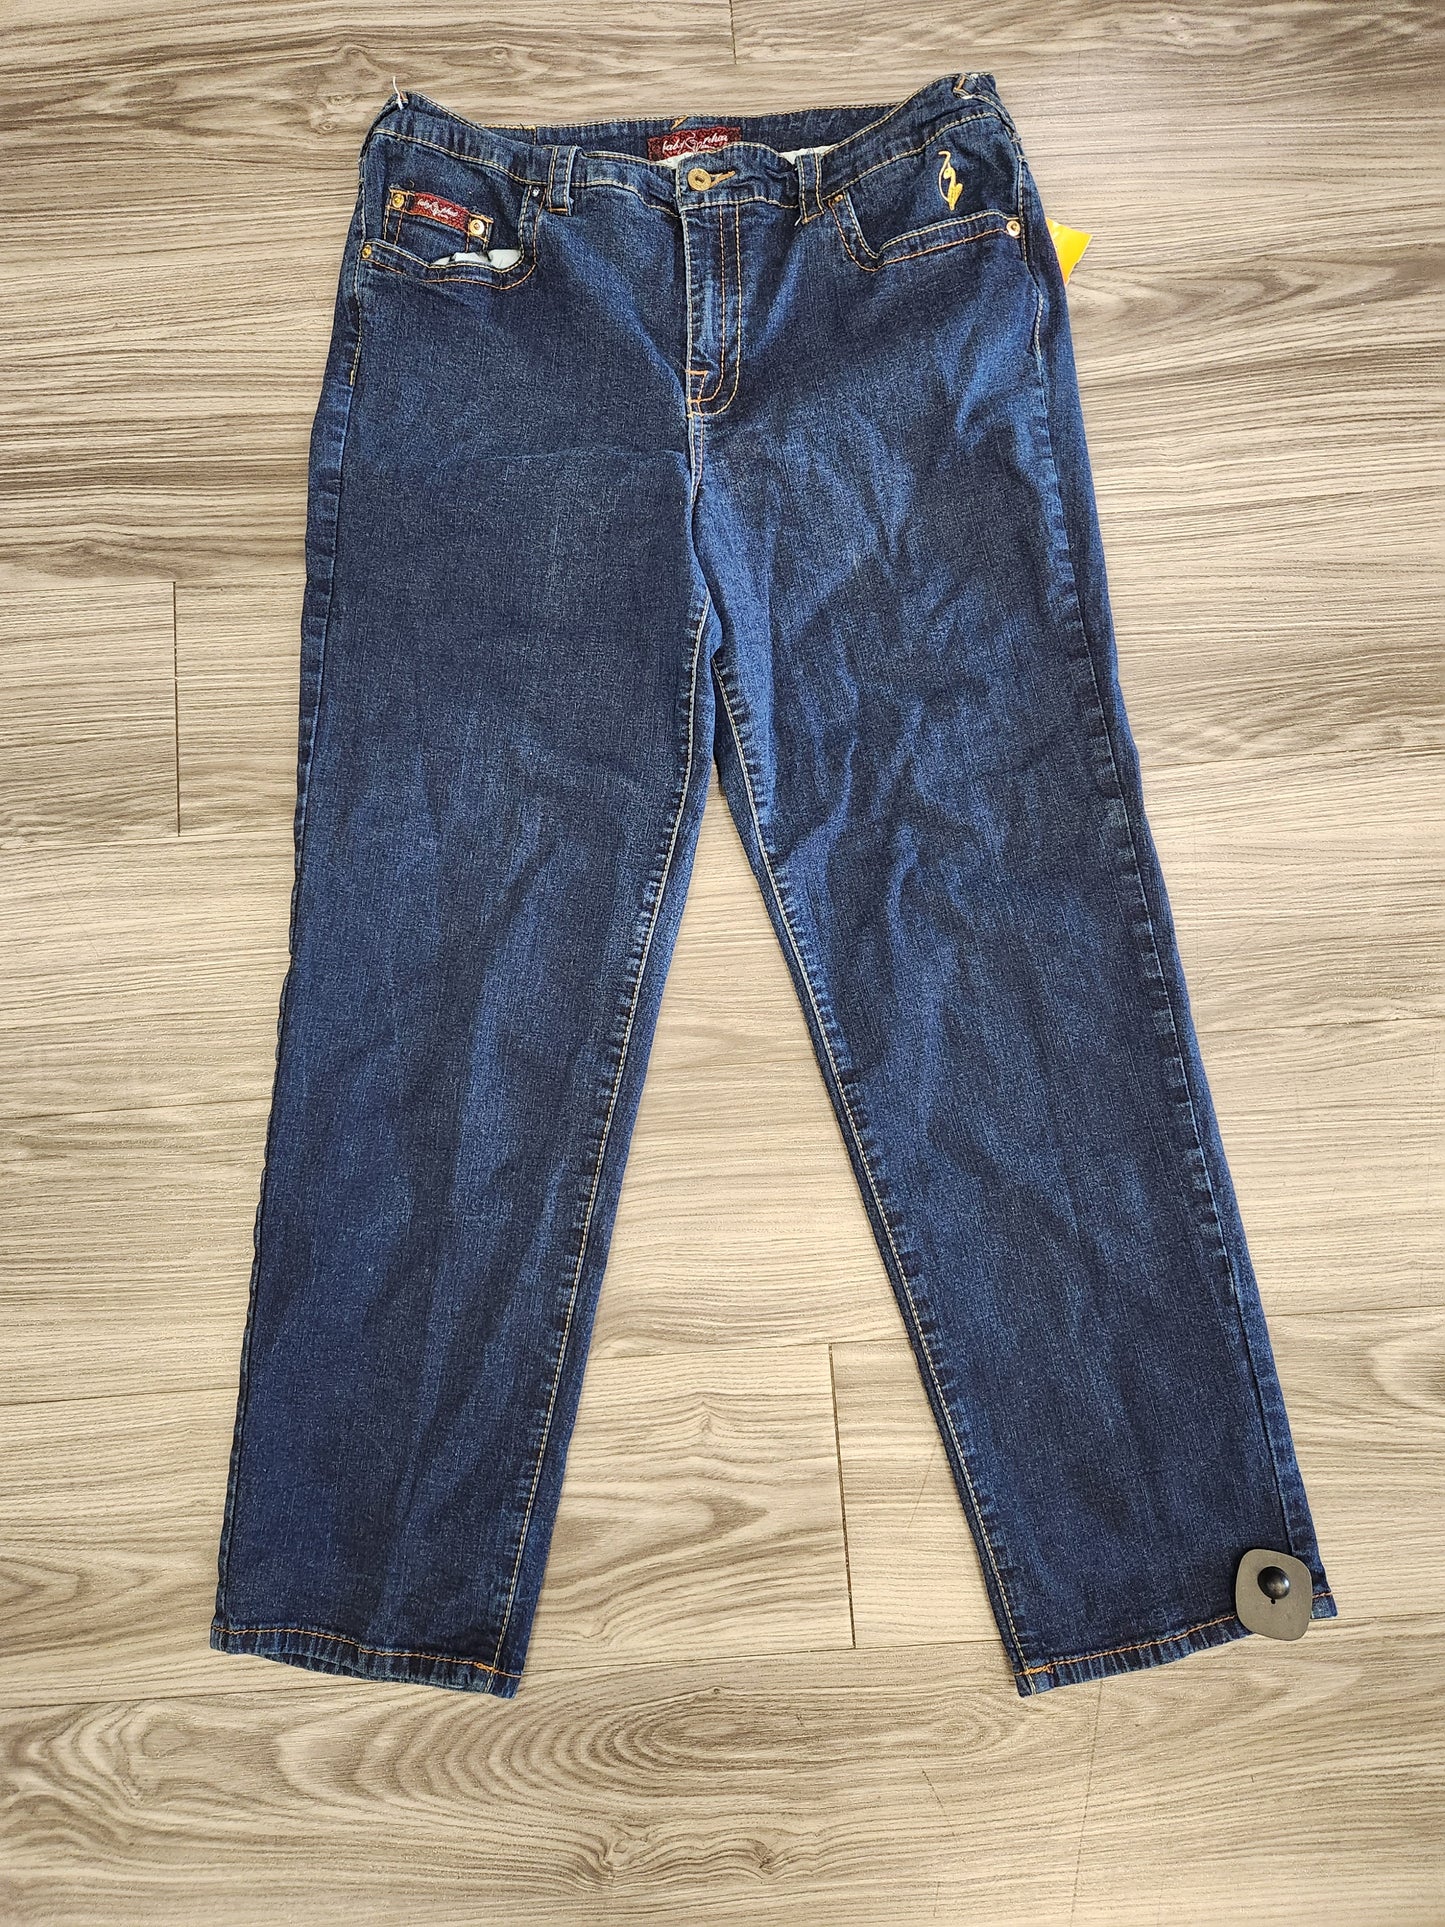 Blue Jeans Straight Baby Phat, Size 20